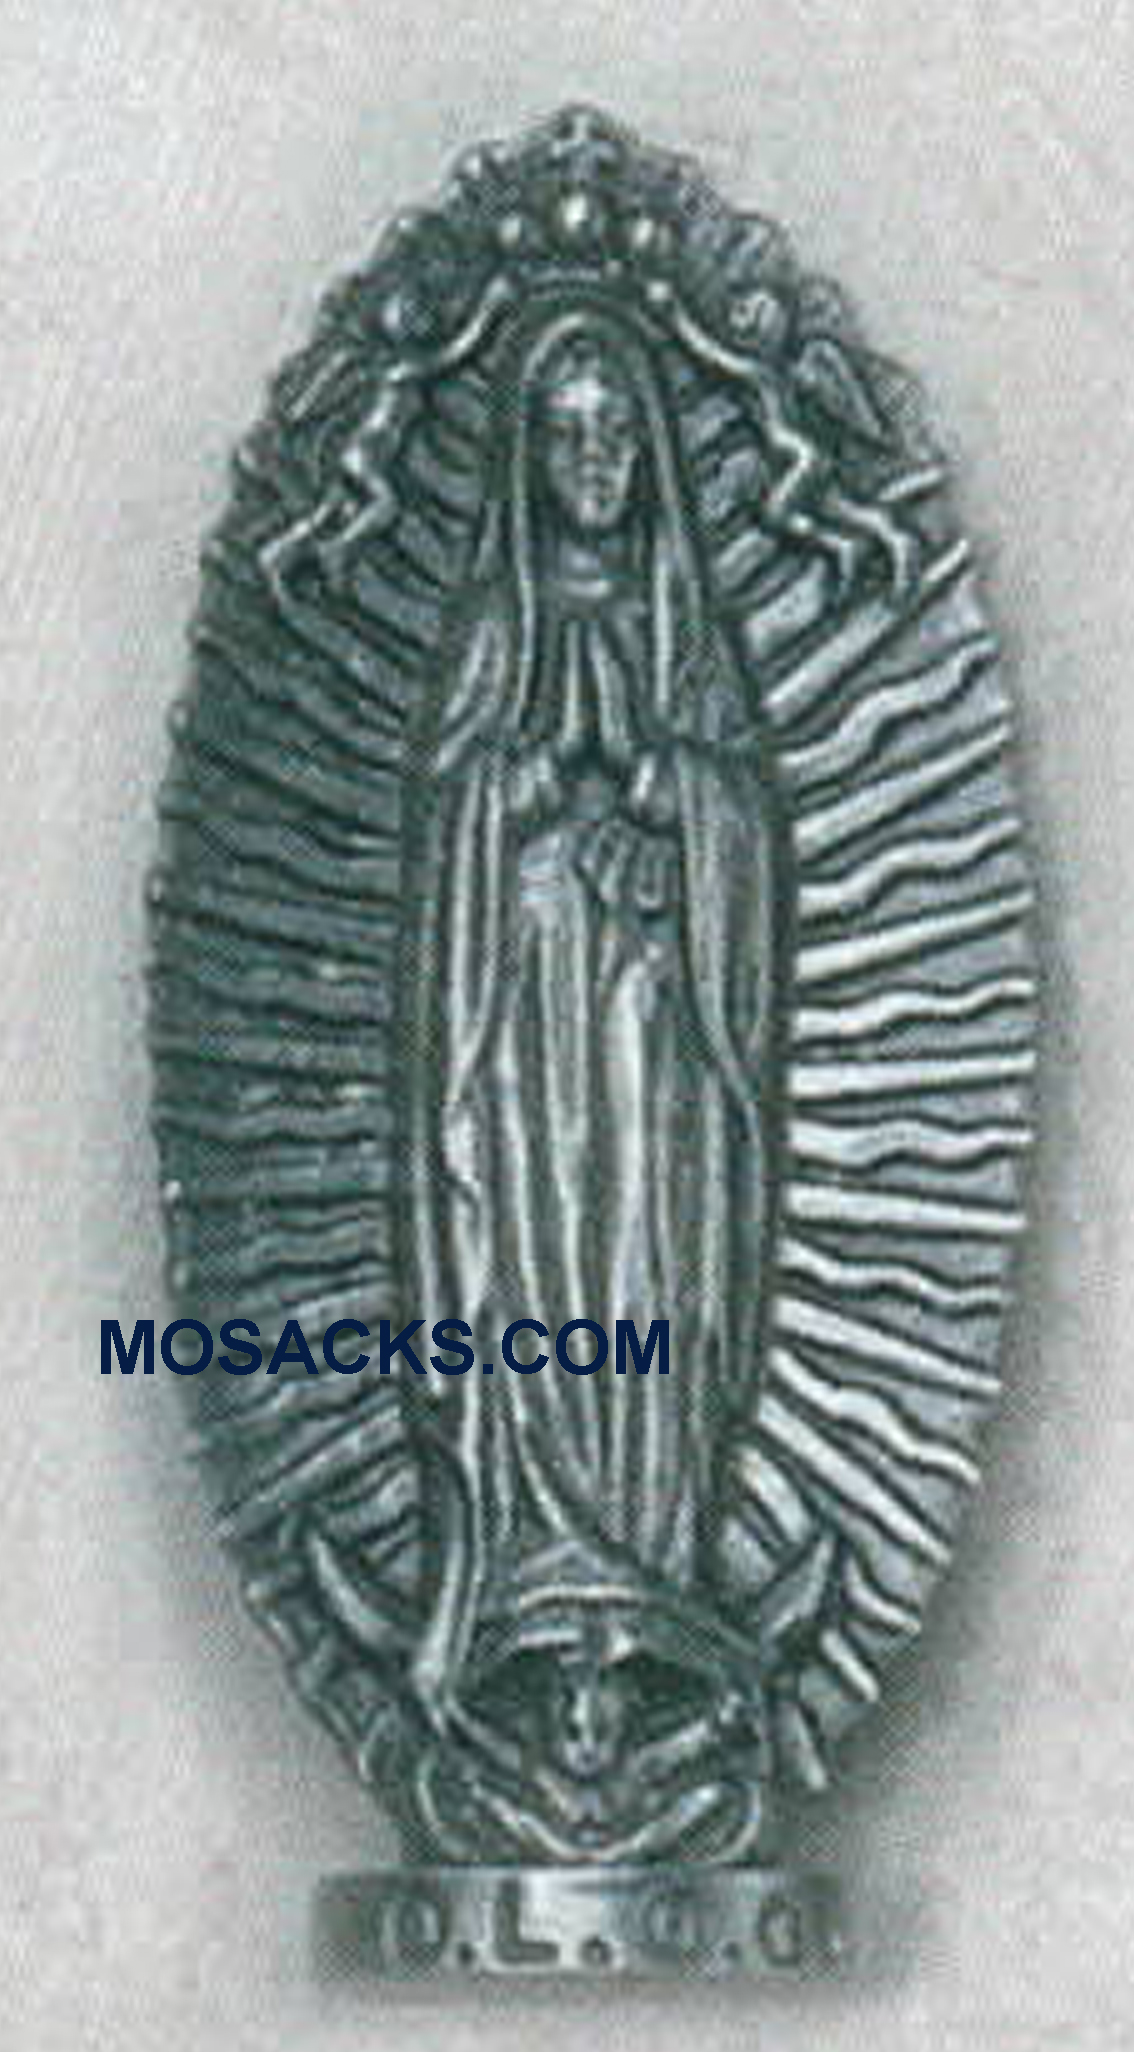 Pewter Statue Our Lady of Guadalupe - PW77854 This Our Lady of Guadalupe Statue is made of Pewter 3inches in height, PW77854.